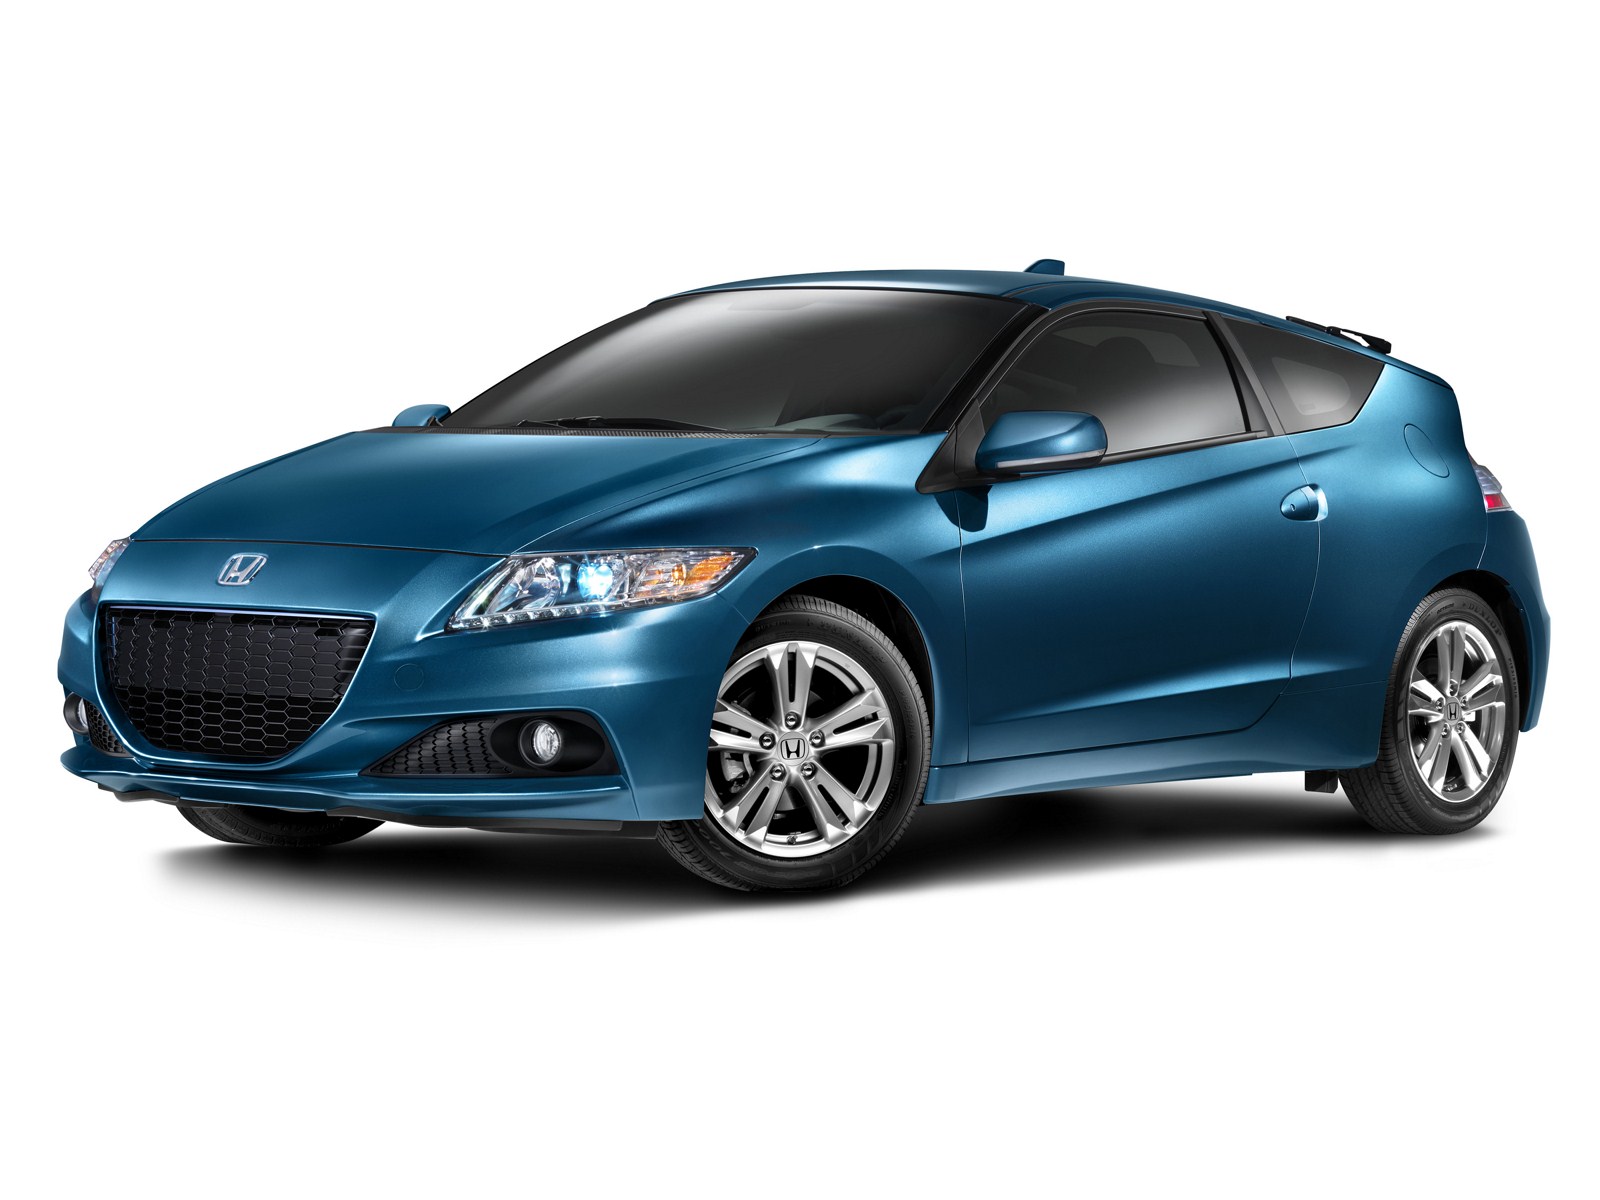 2013 Honda CR-Z Sport Hybrid Coupe Gets Performance Enhancements, Fresh  Styling and Host of Feature Upgrades